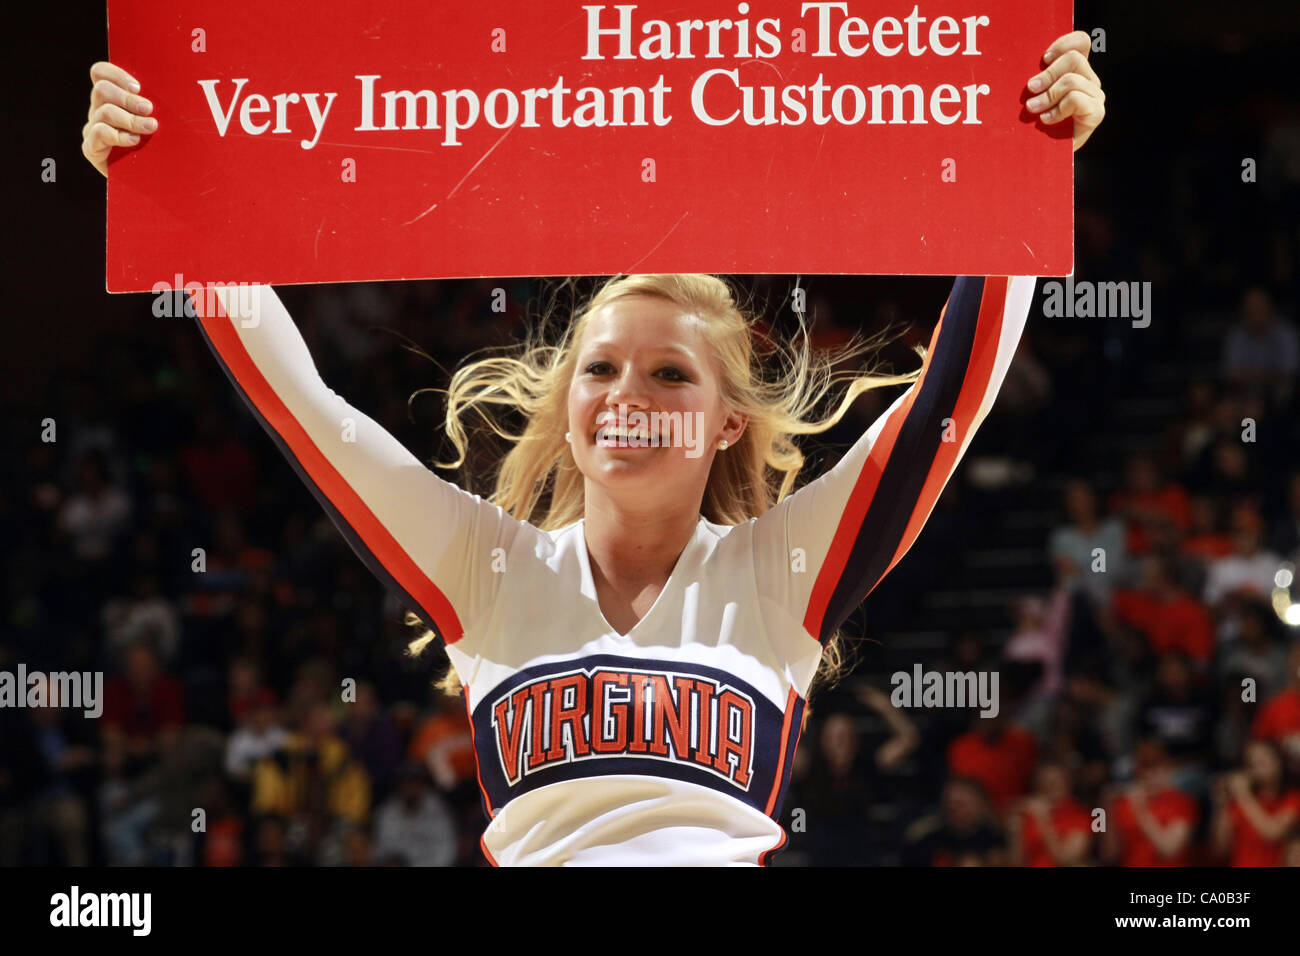 Nov. 20, 2011 - Charlottesville, Virginia, United States - Virginia Cavaliers cheerleaders hold up a Harris Teeter Vic card sign during the game on November 20, 2011 against the Tennessee Lady Volunteers at the John Paul Jones Arena in Charlottesville, Virginia. Virginia defeated Tennessee in overti Stock Photo